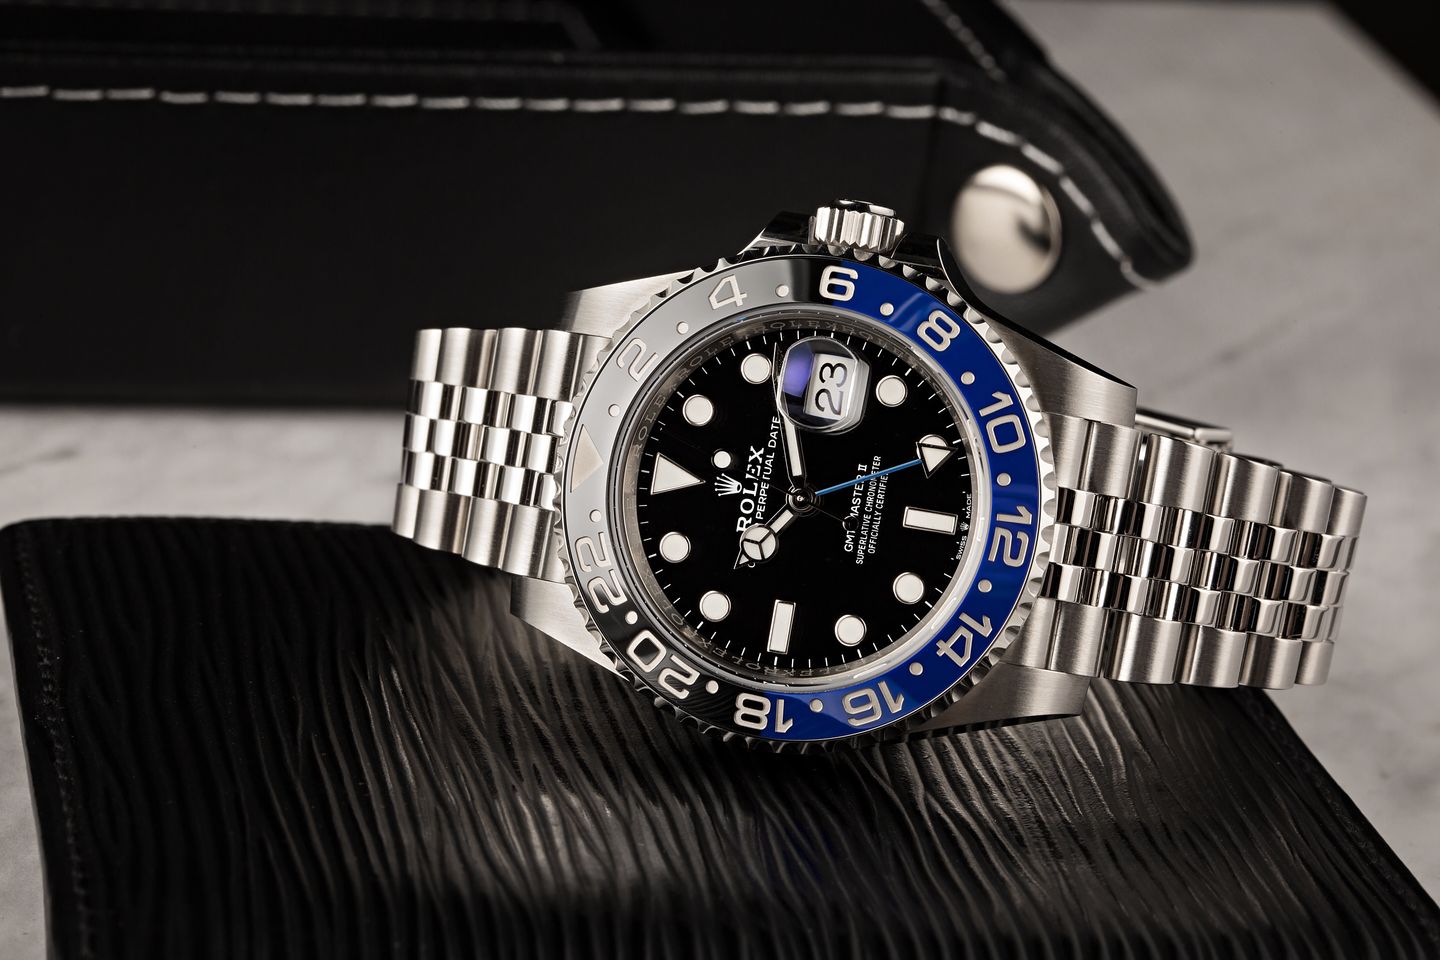 Top 25 Luxury Watches Articles 2019